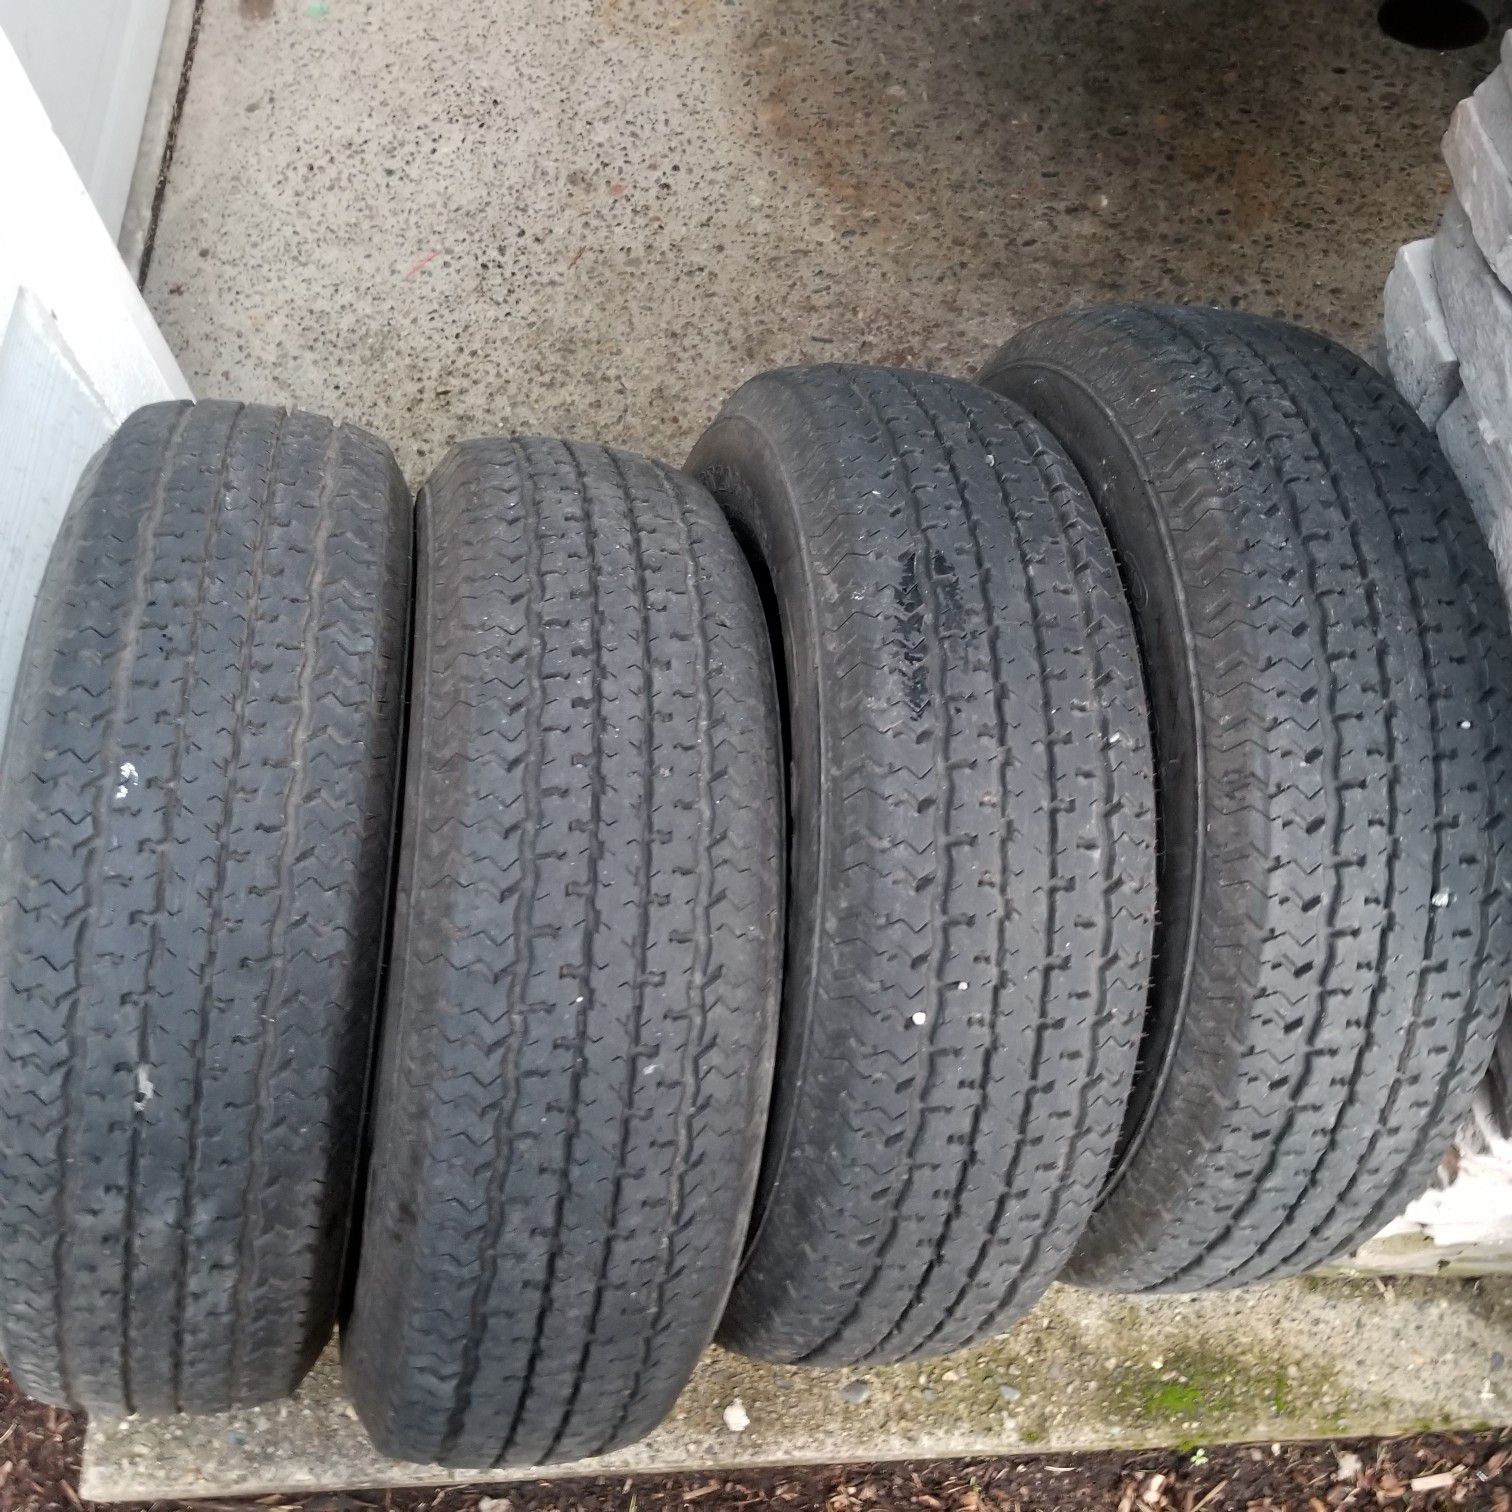 St205/75/14 used trailer tires